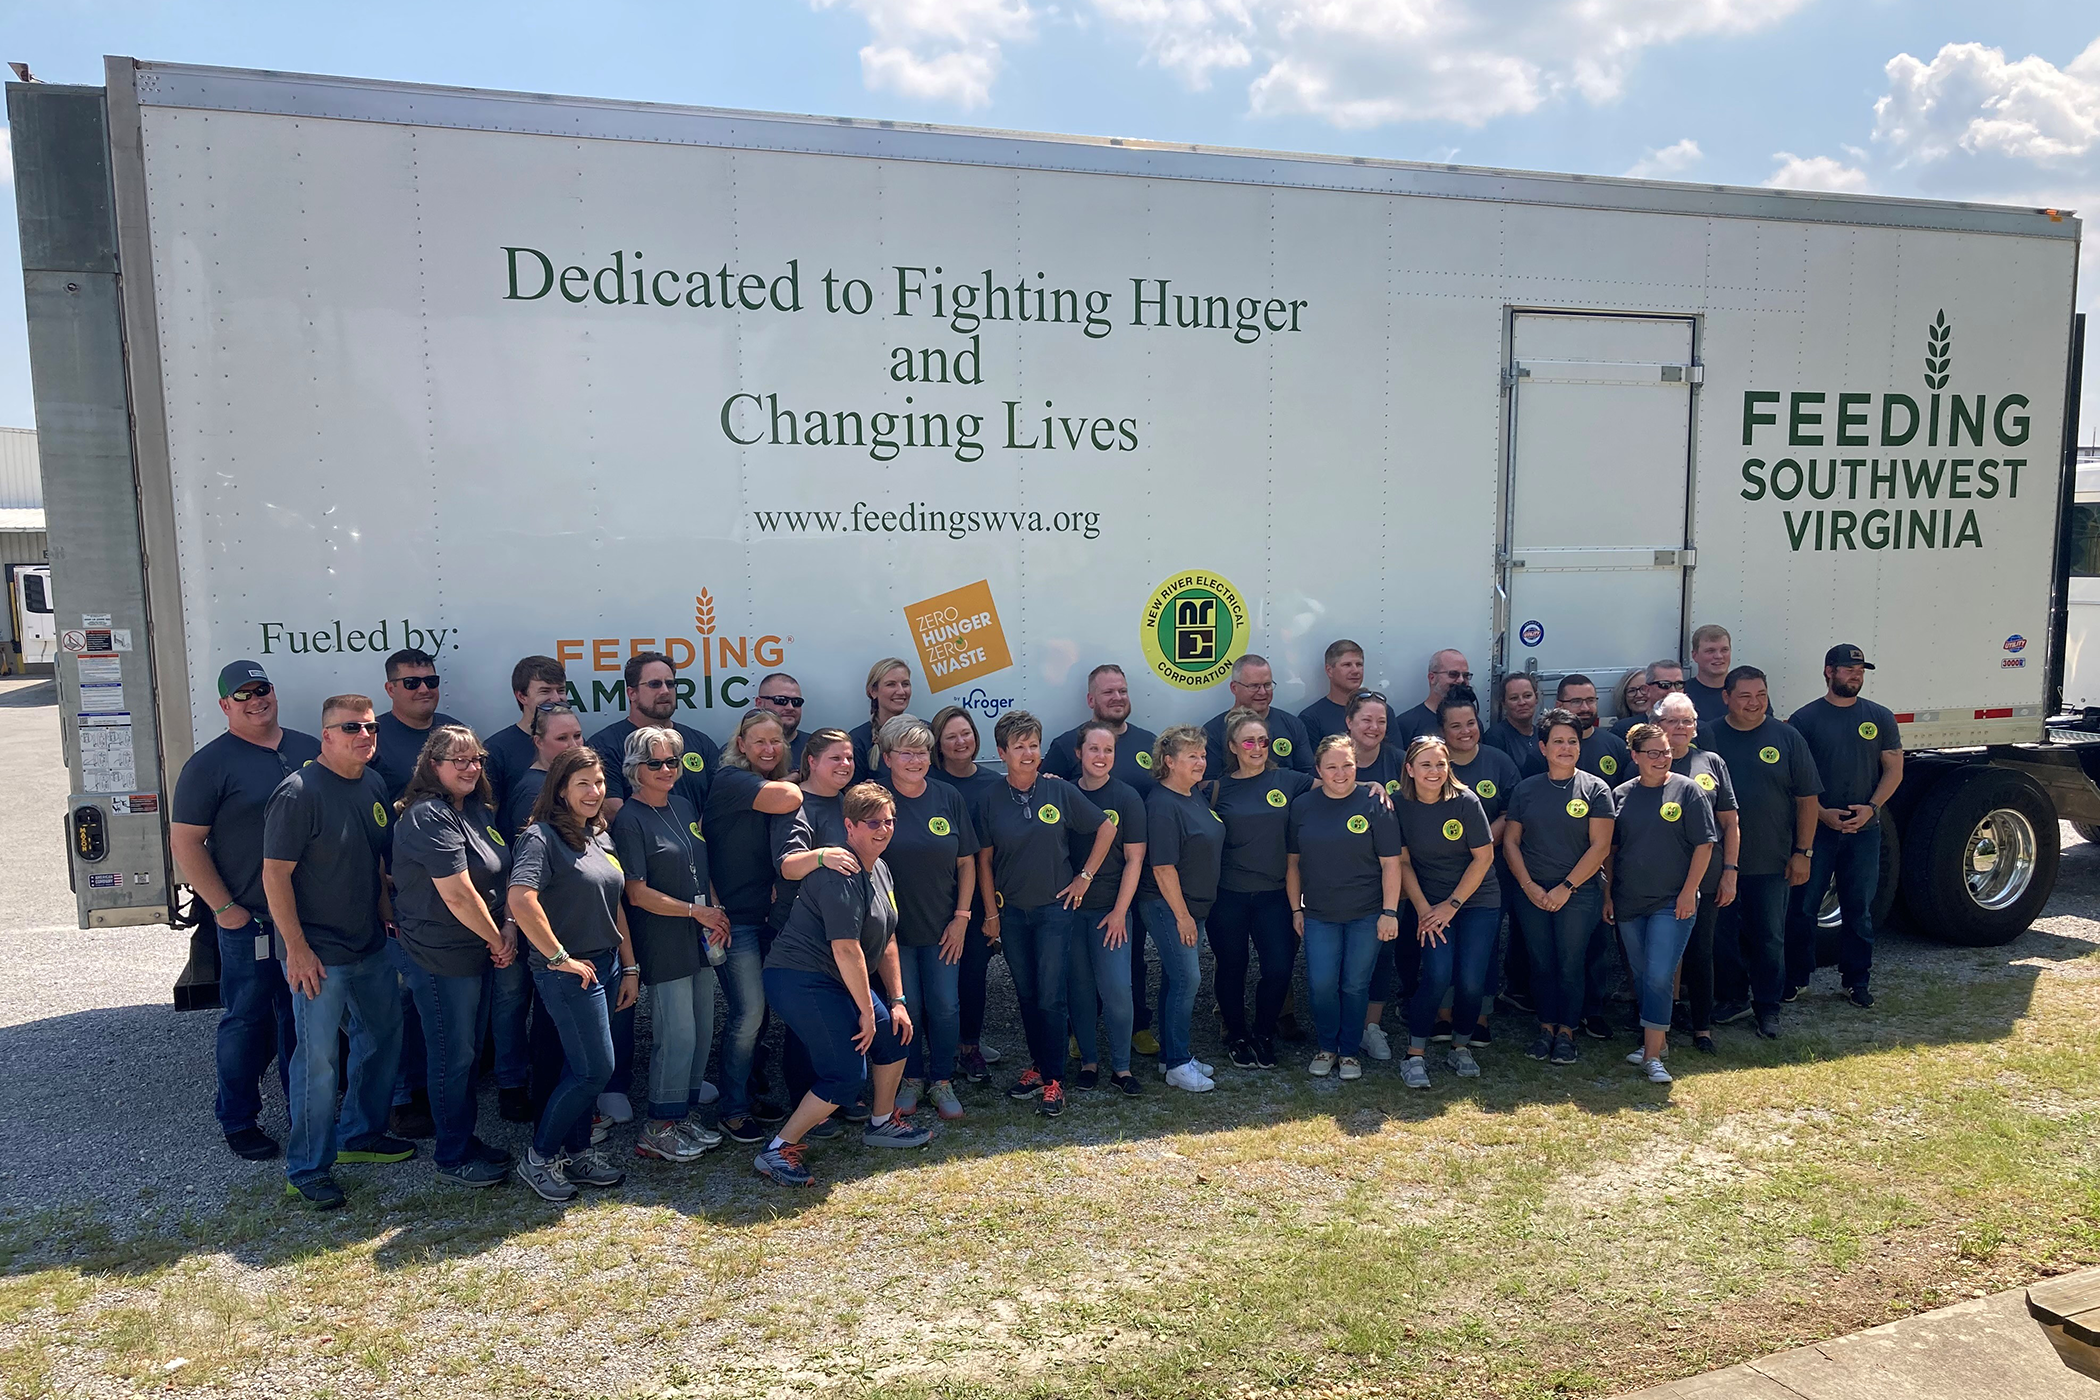 New River Employees standing in front of a Feeding Southwest Virginia trailer.